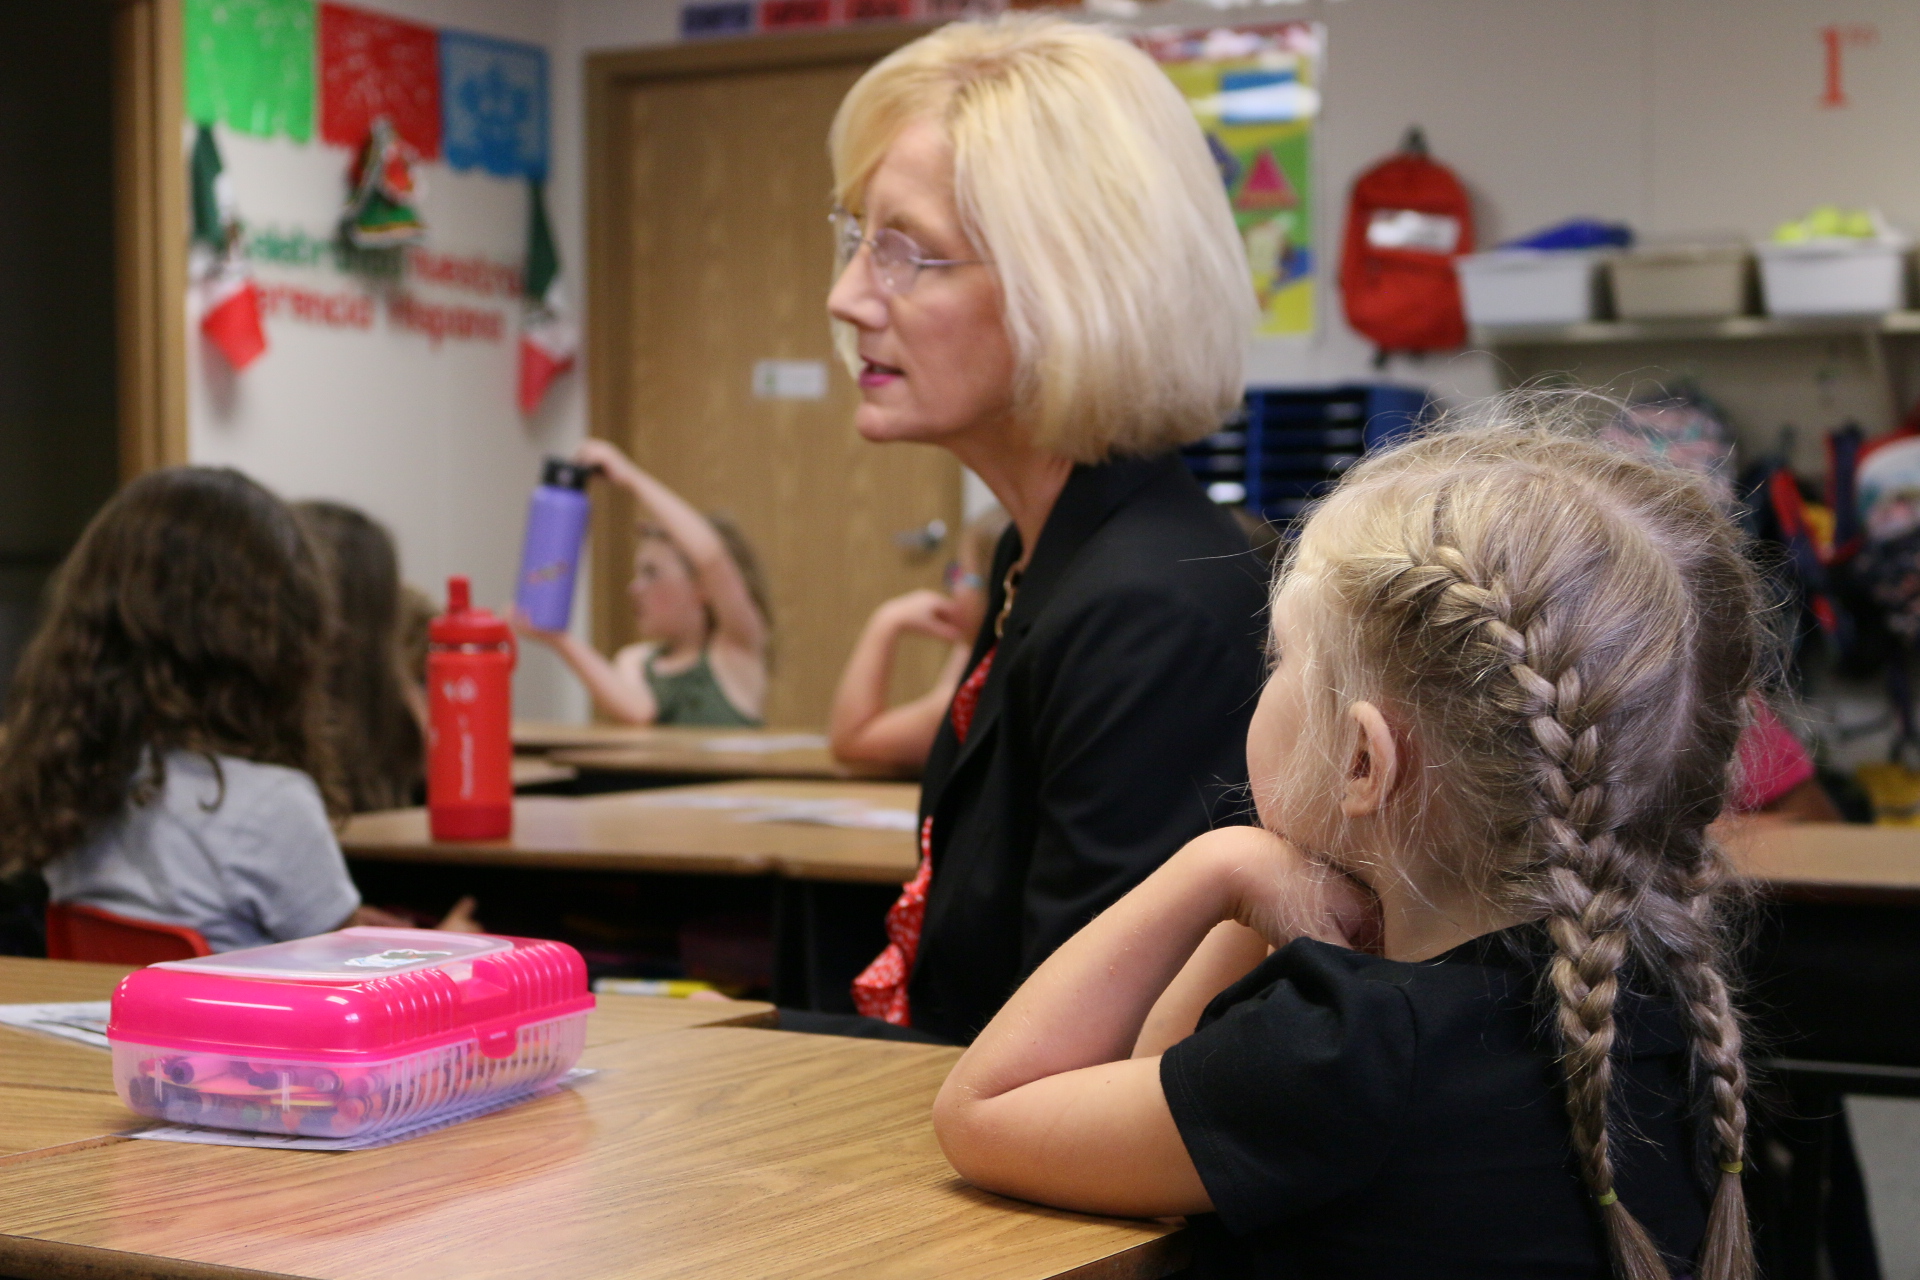 Superintendent Dr. Mary Templeton sits at a desk with blonde 1st grade girl. Girl in foreground has two french braids going down the back of her head and a black shirt. Two students in background sit at desks and look attentive.